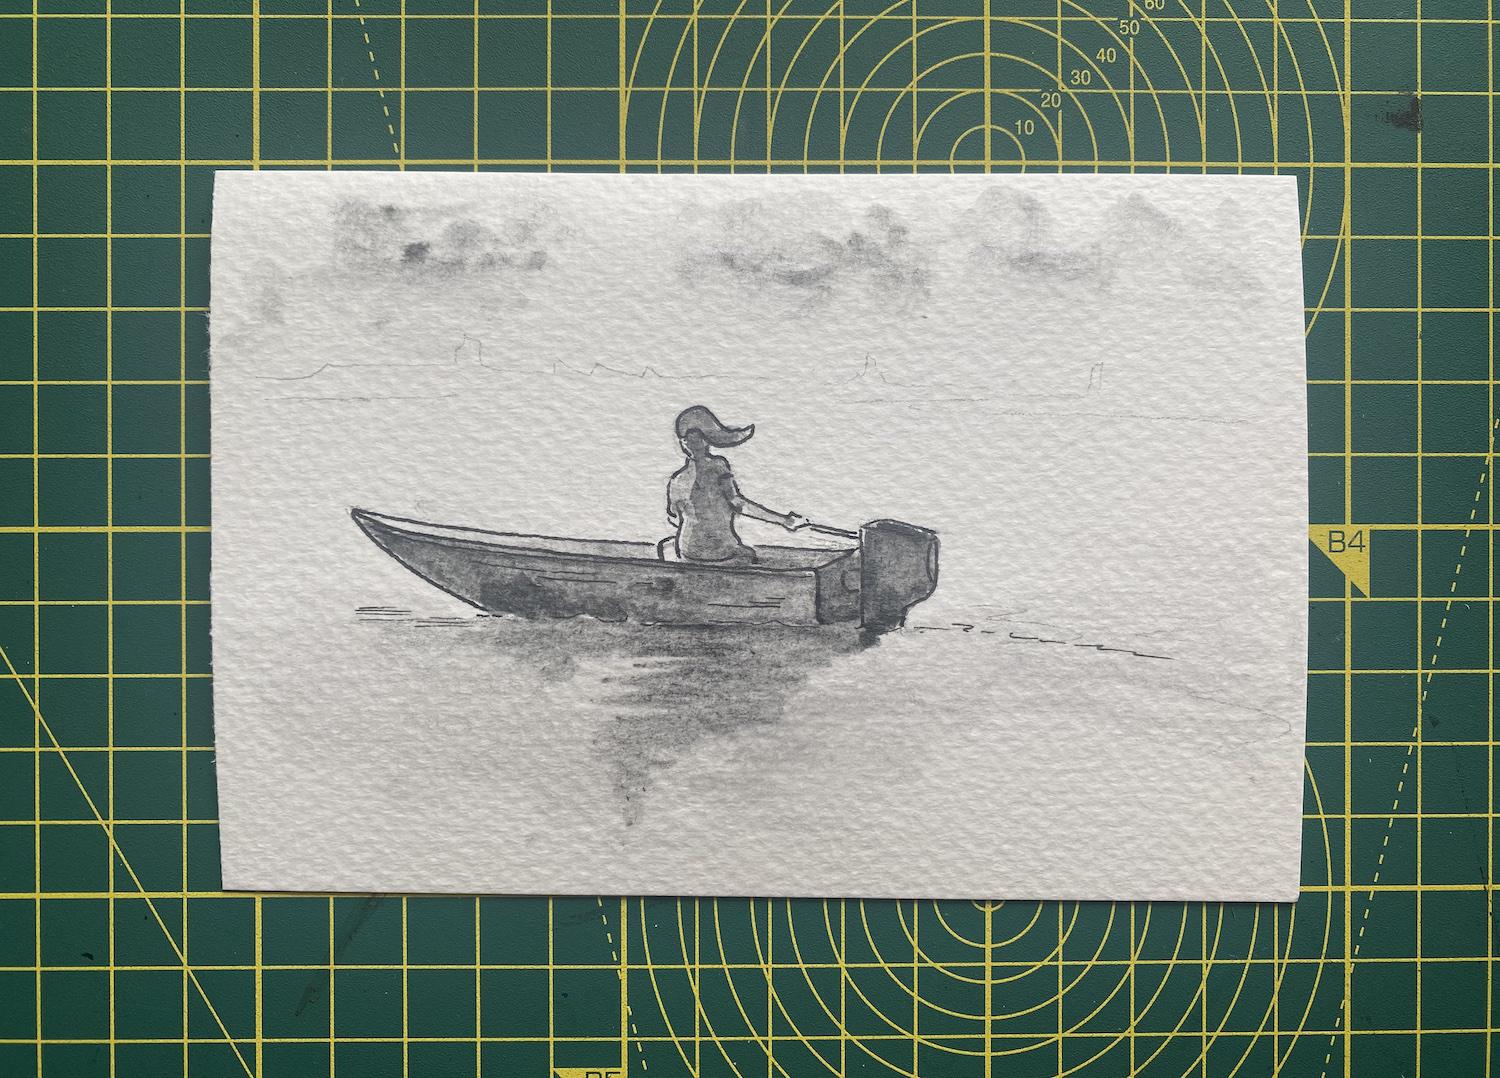 An ink and graphite sketch of a woman on a small boat